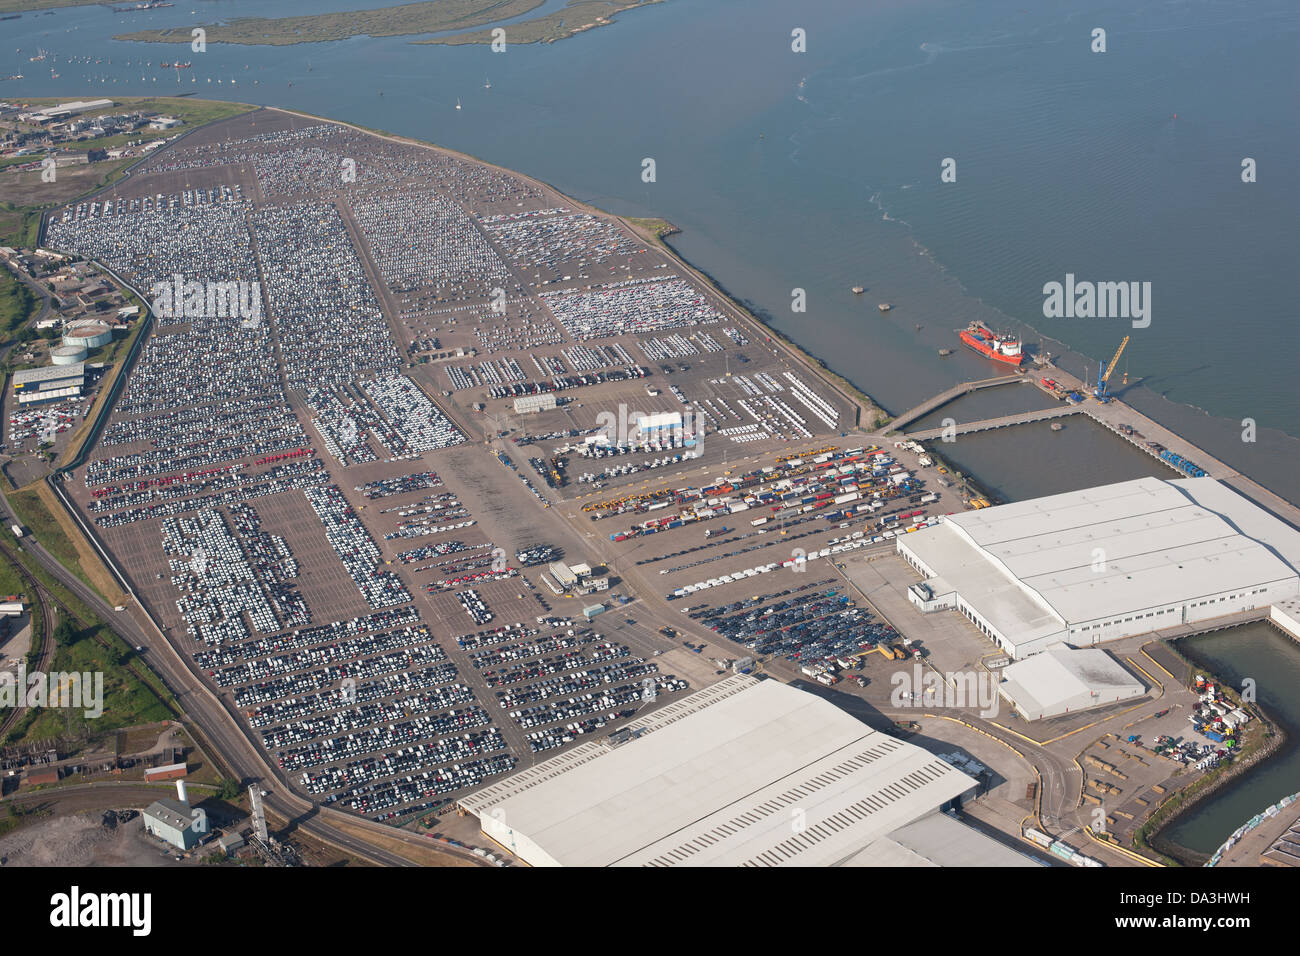 AERIAL VIEW. Vast car depository. Thames Estuary, Sheerness, Isle of Sheppey, Kent, England, Great Britain, United Kingdom. Stock Photo